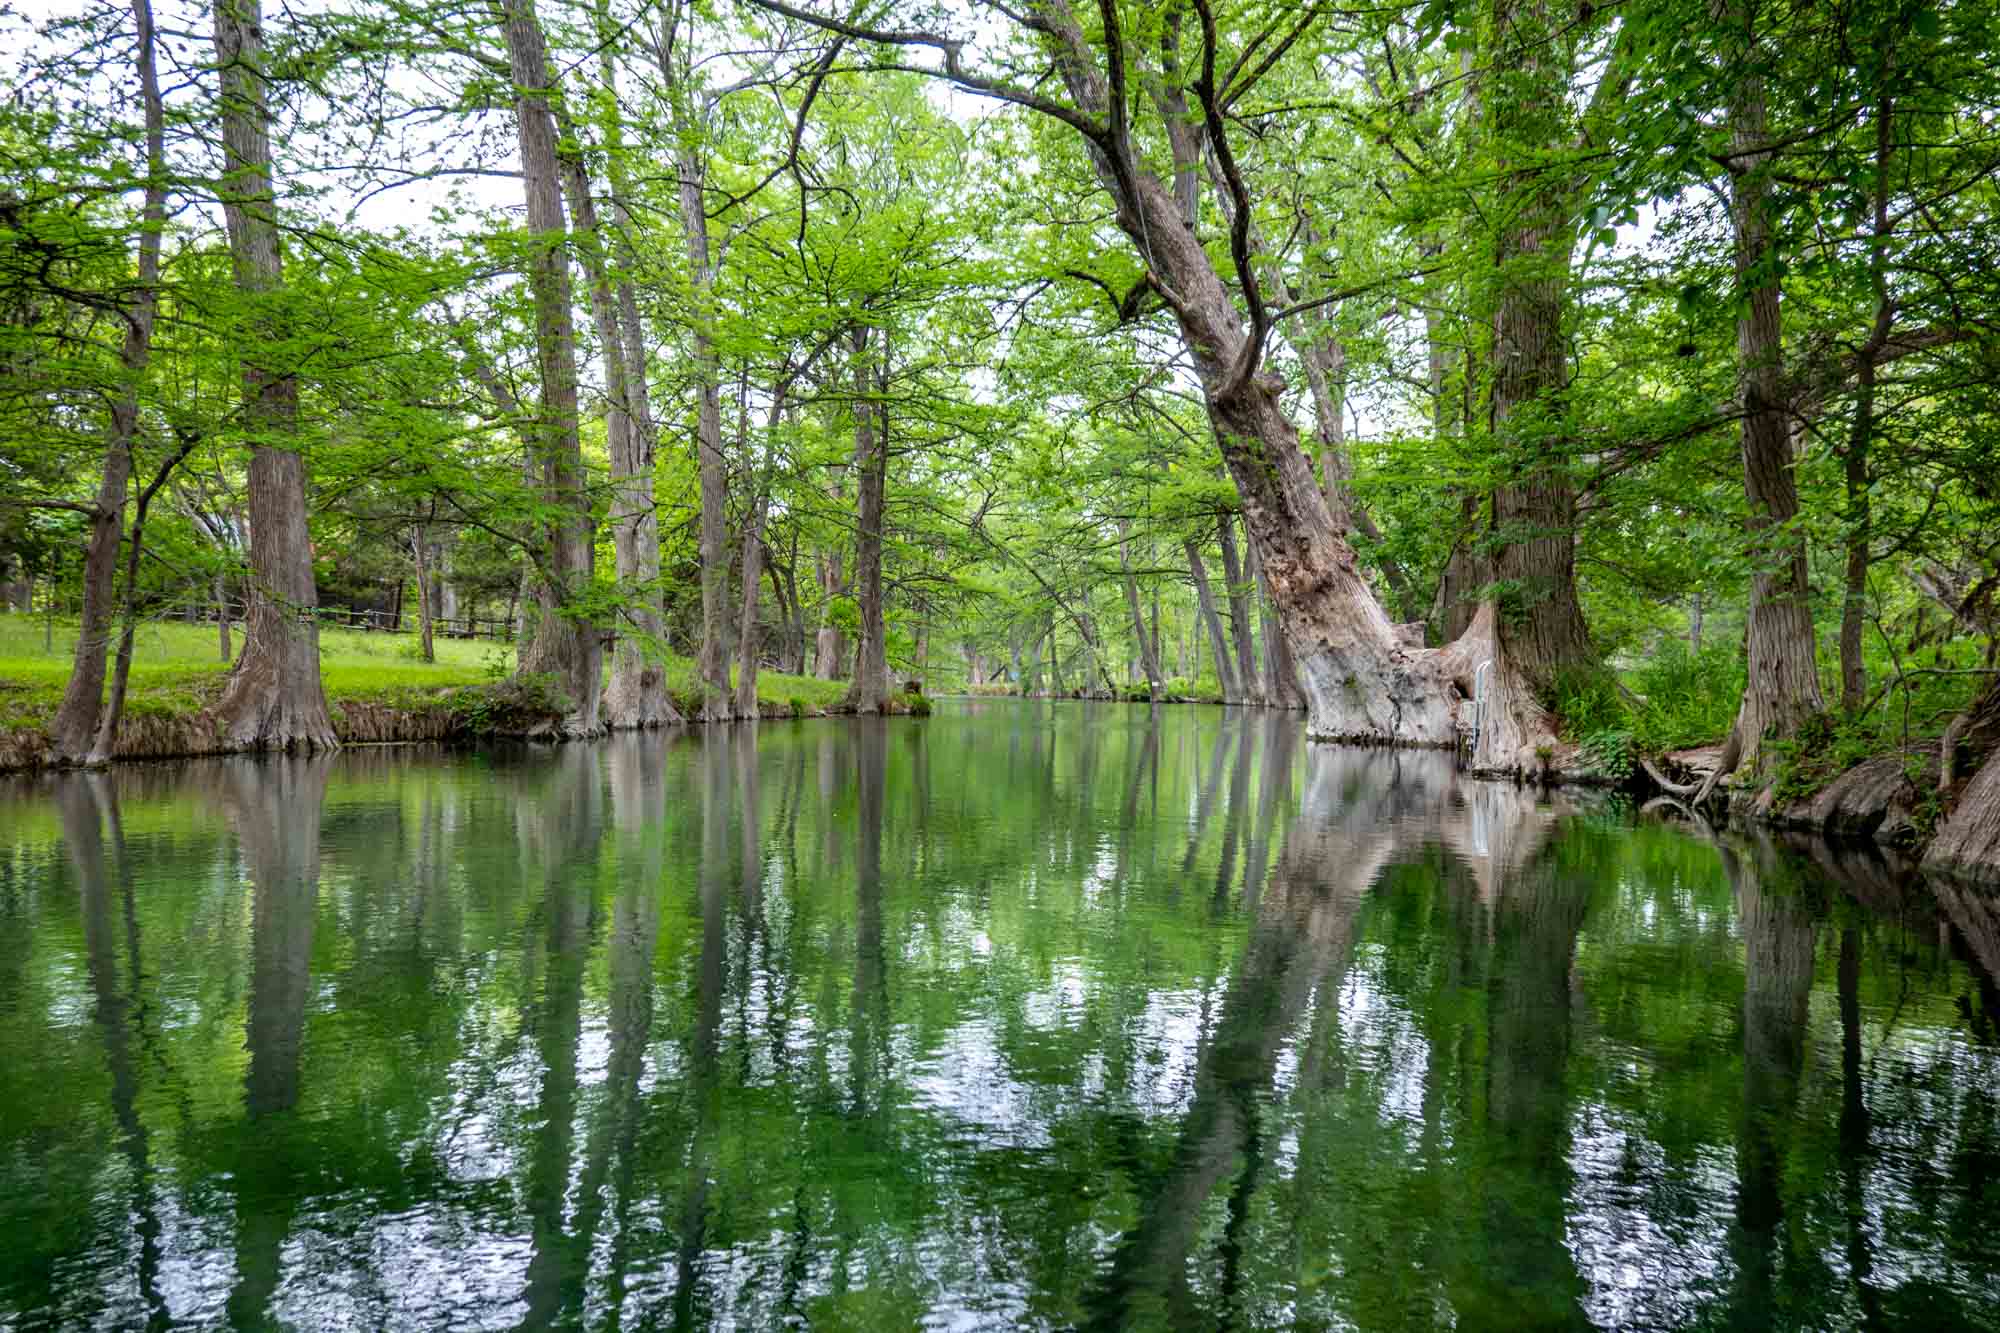 Cypress trees lining the sides of a natural swimming hole